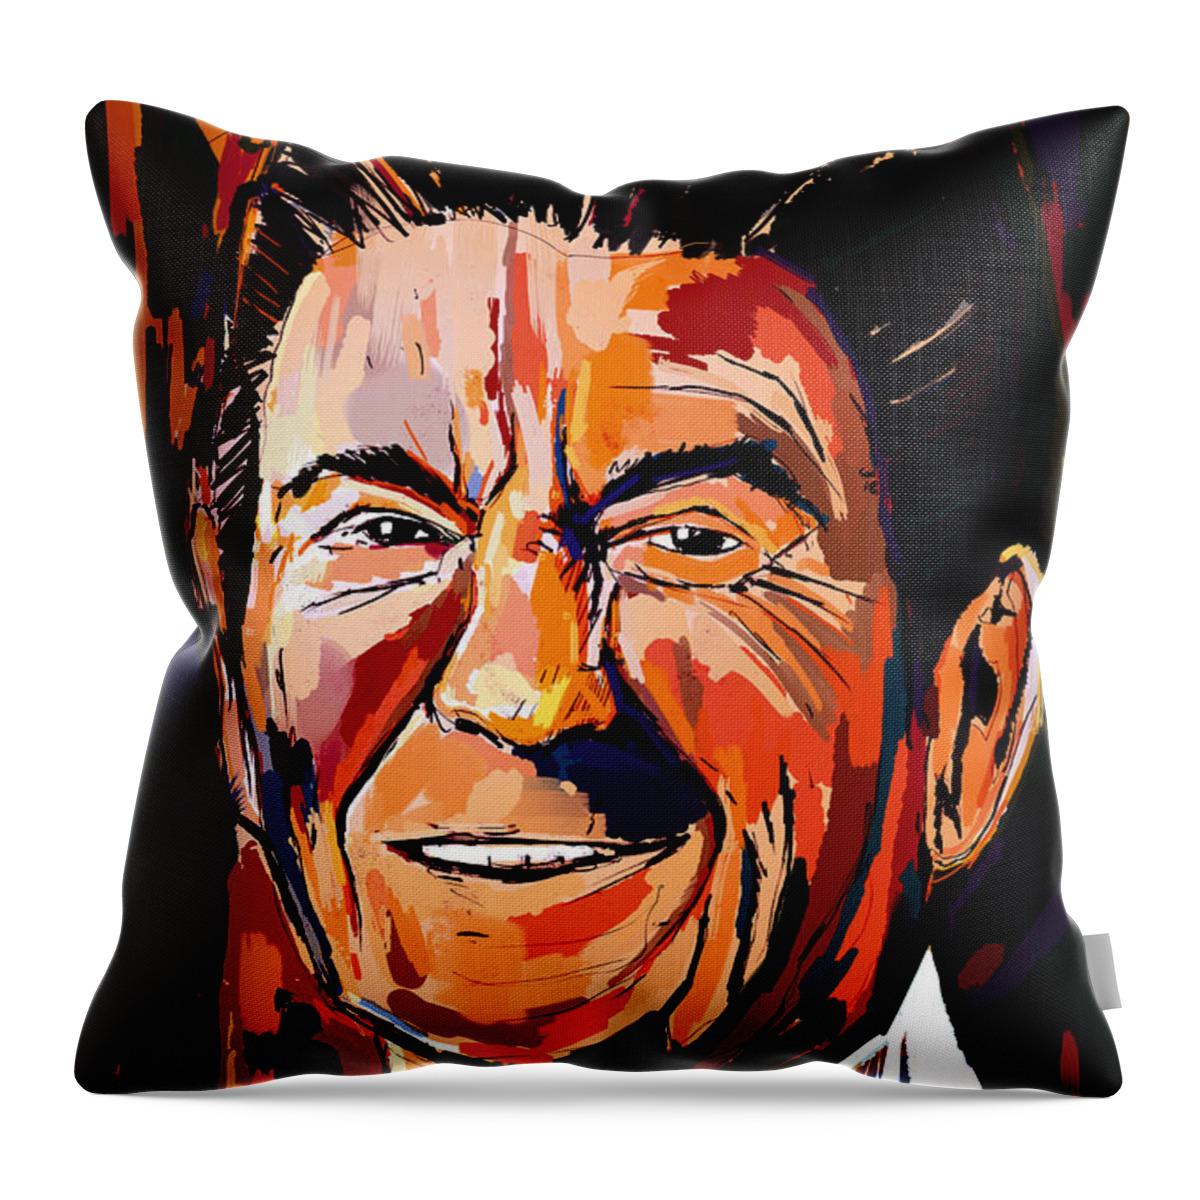  Throw Pillow featuring the painting Reagan Revisited by John Gholson